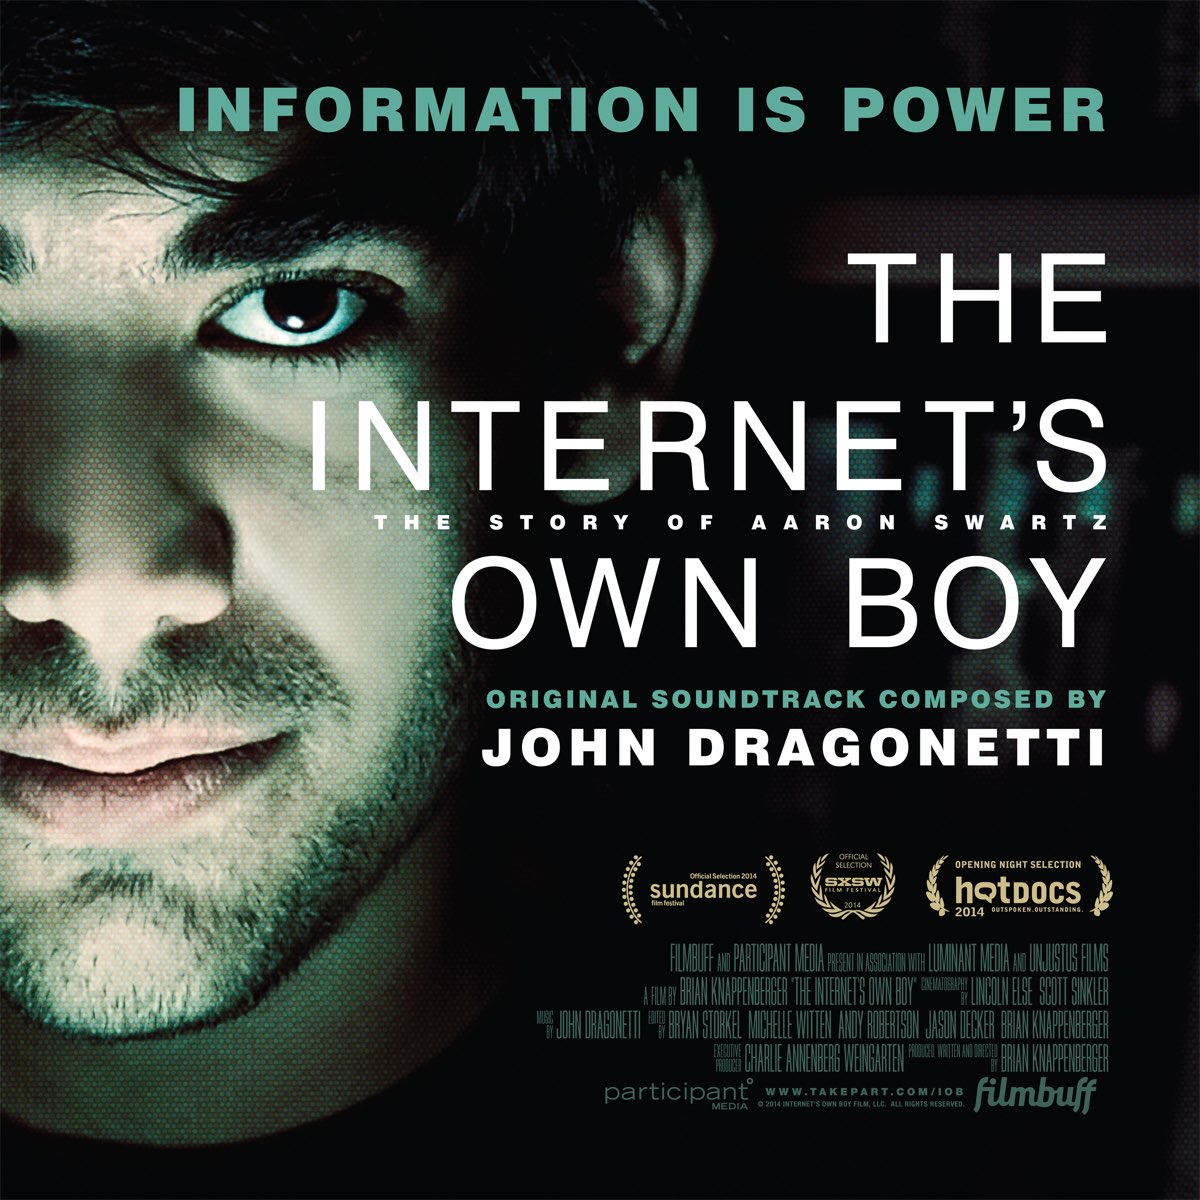 The Internet’s own boy. Poster the Internet’s own boy. The Internet’s own boy (2014). 1. The Internet’s own boy. Own boy